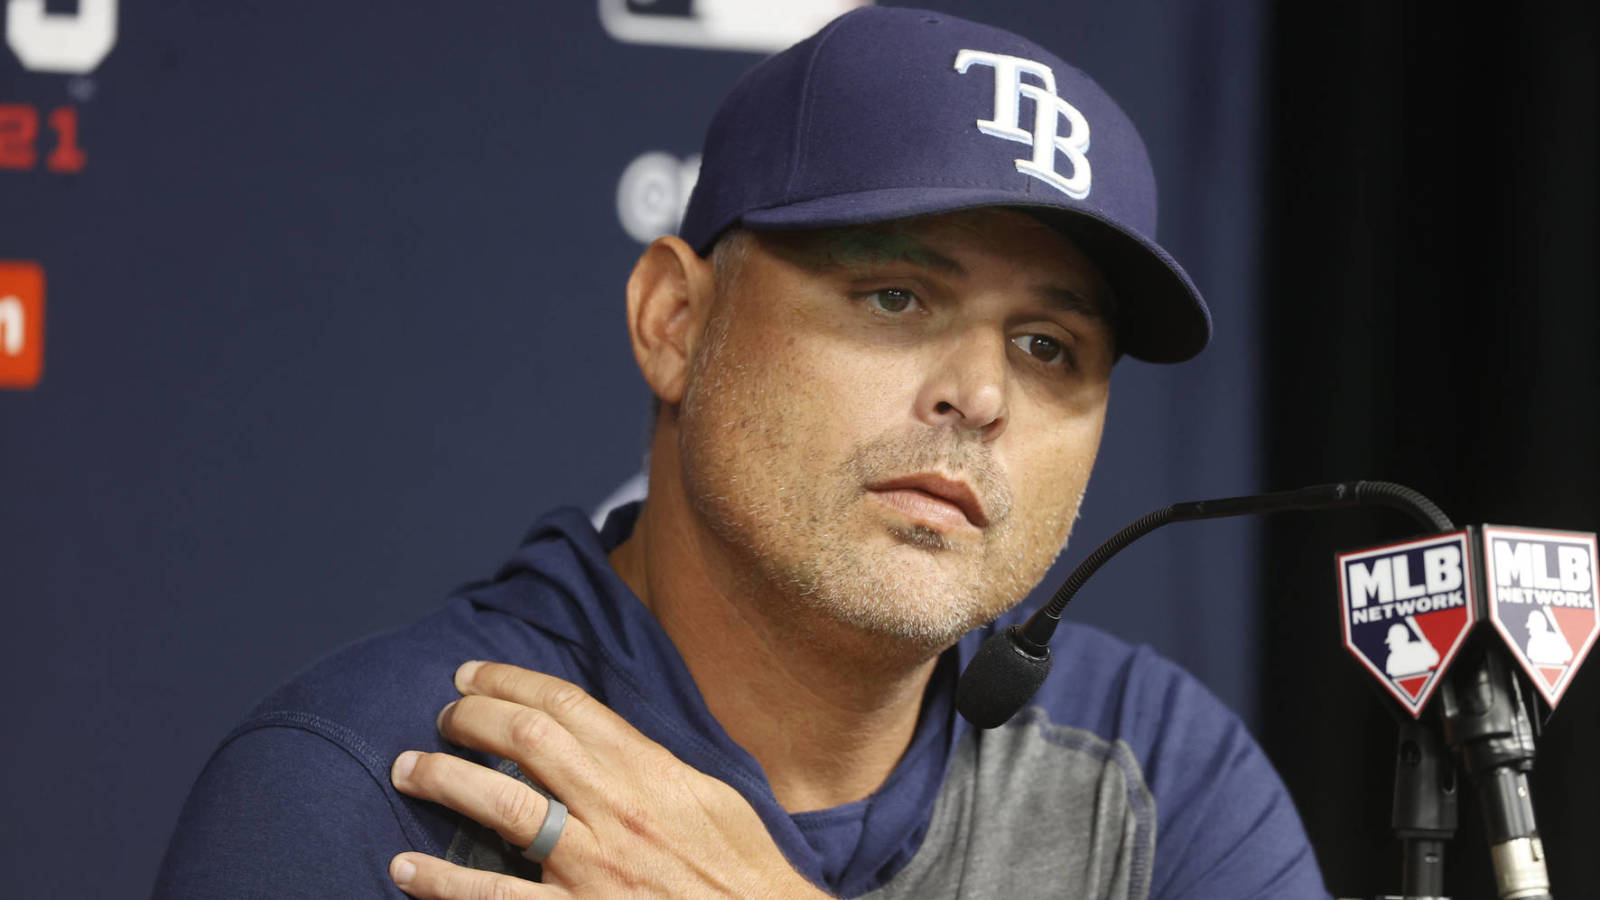 Kevin Cash is tired of questions about Rays' payroll